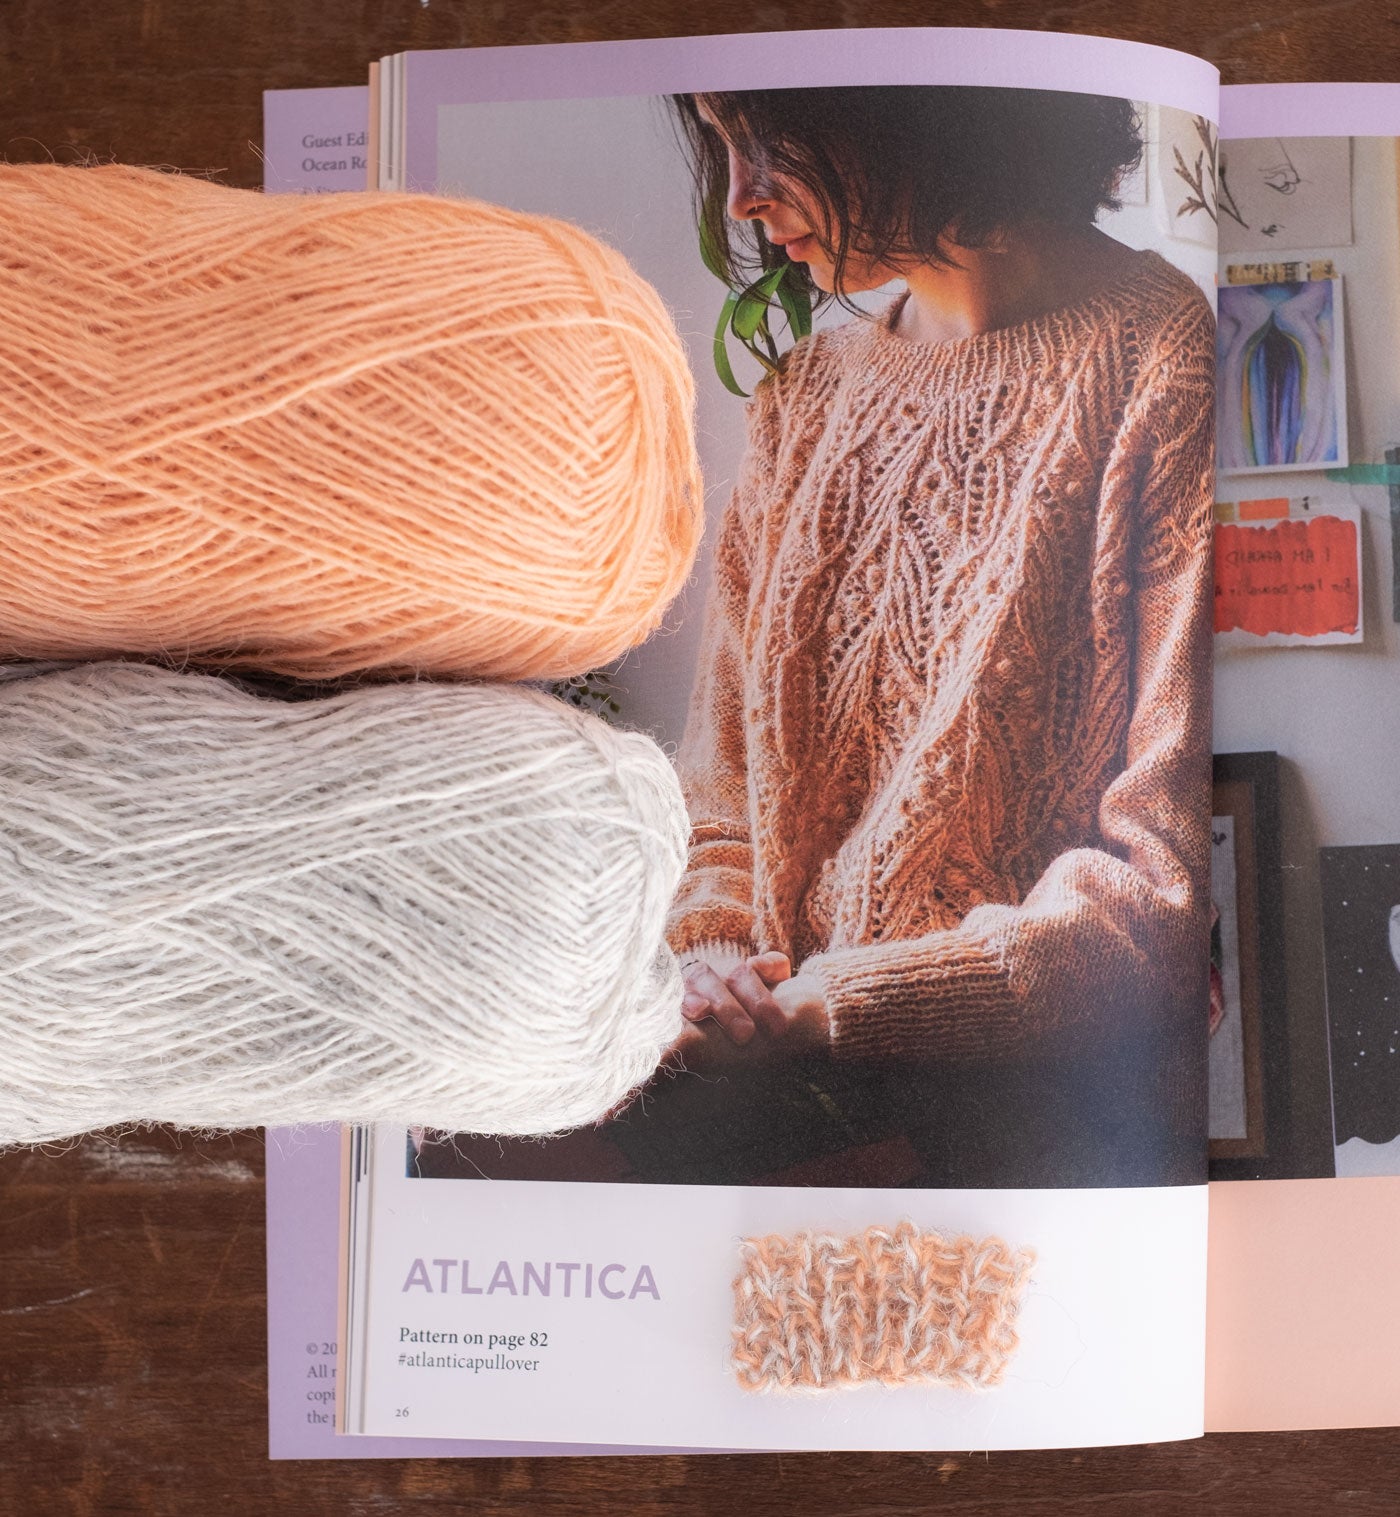 A magazine lays open to a page showing a person with chin-length curly hair wearing the Atlantica Pullover—a delicate lace and cable sweater with a slightly oversized fit. It is a pale, muted peachy color. Two balls of laceweight yarn are on top of the magazine, peeking into the frame of the picture. One is pale heathered grey and one is a warm pale peach. They are held together to created the muted marl fabric. 